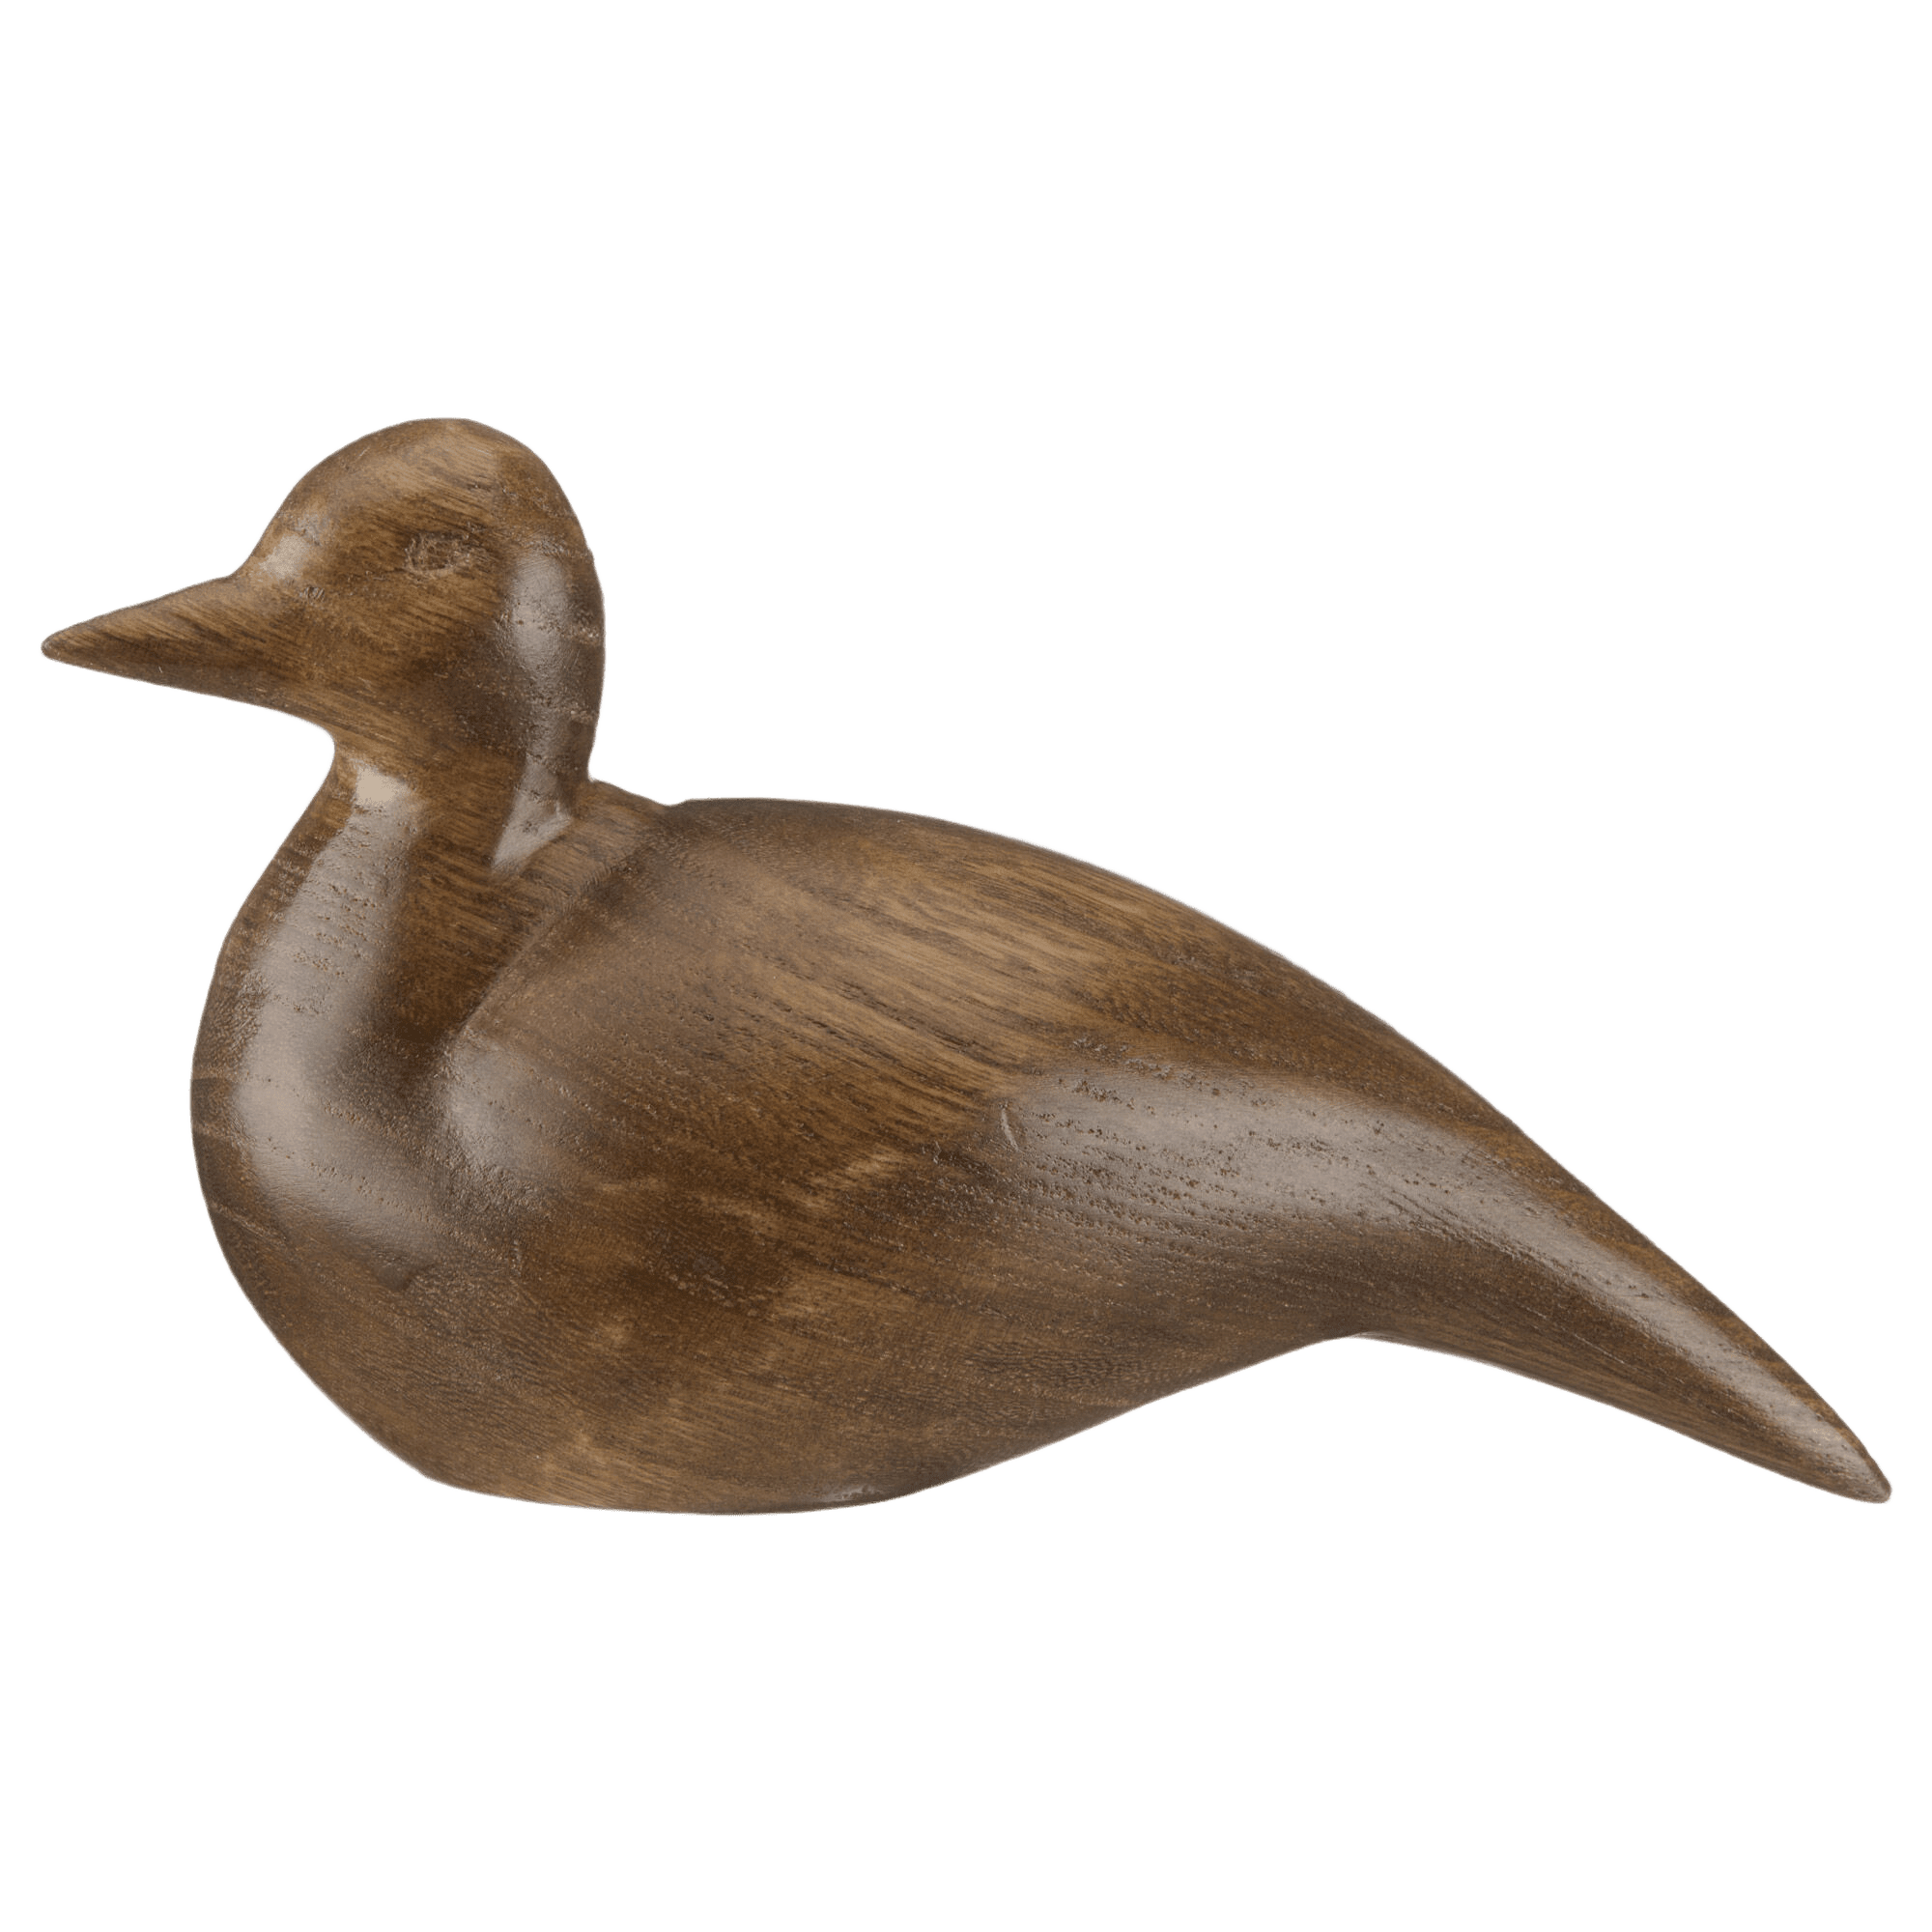 Sculpted Brown Wood Duck